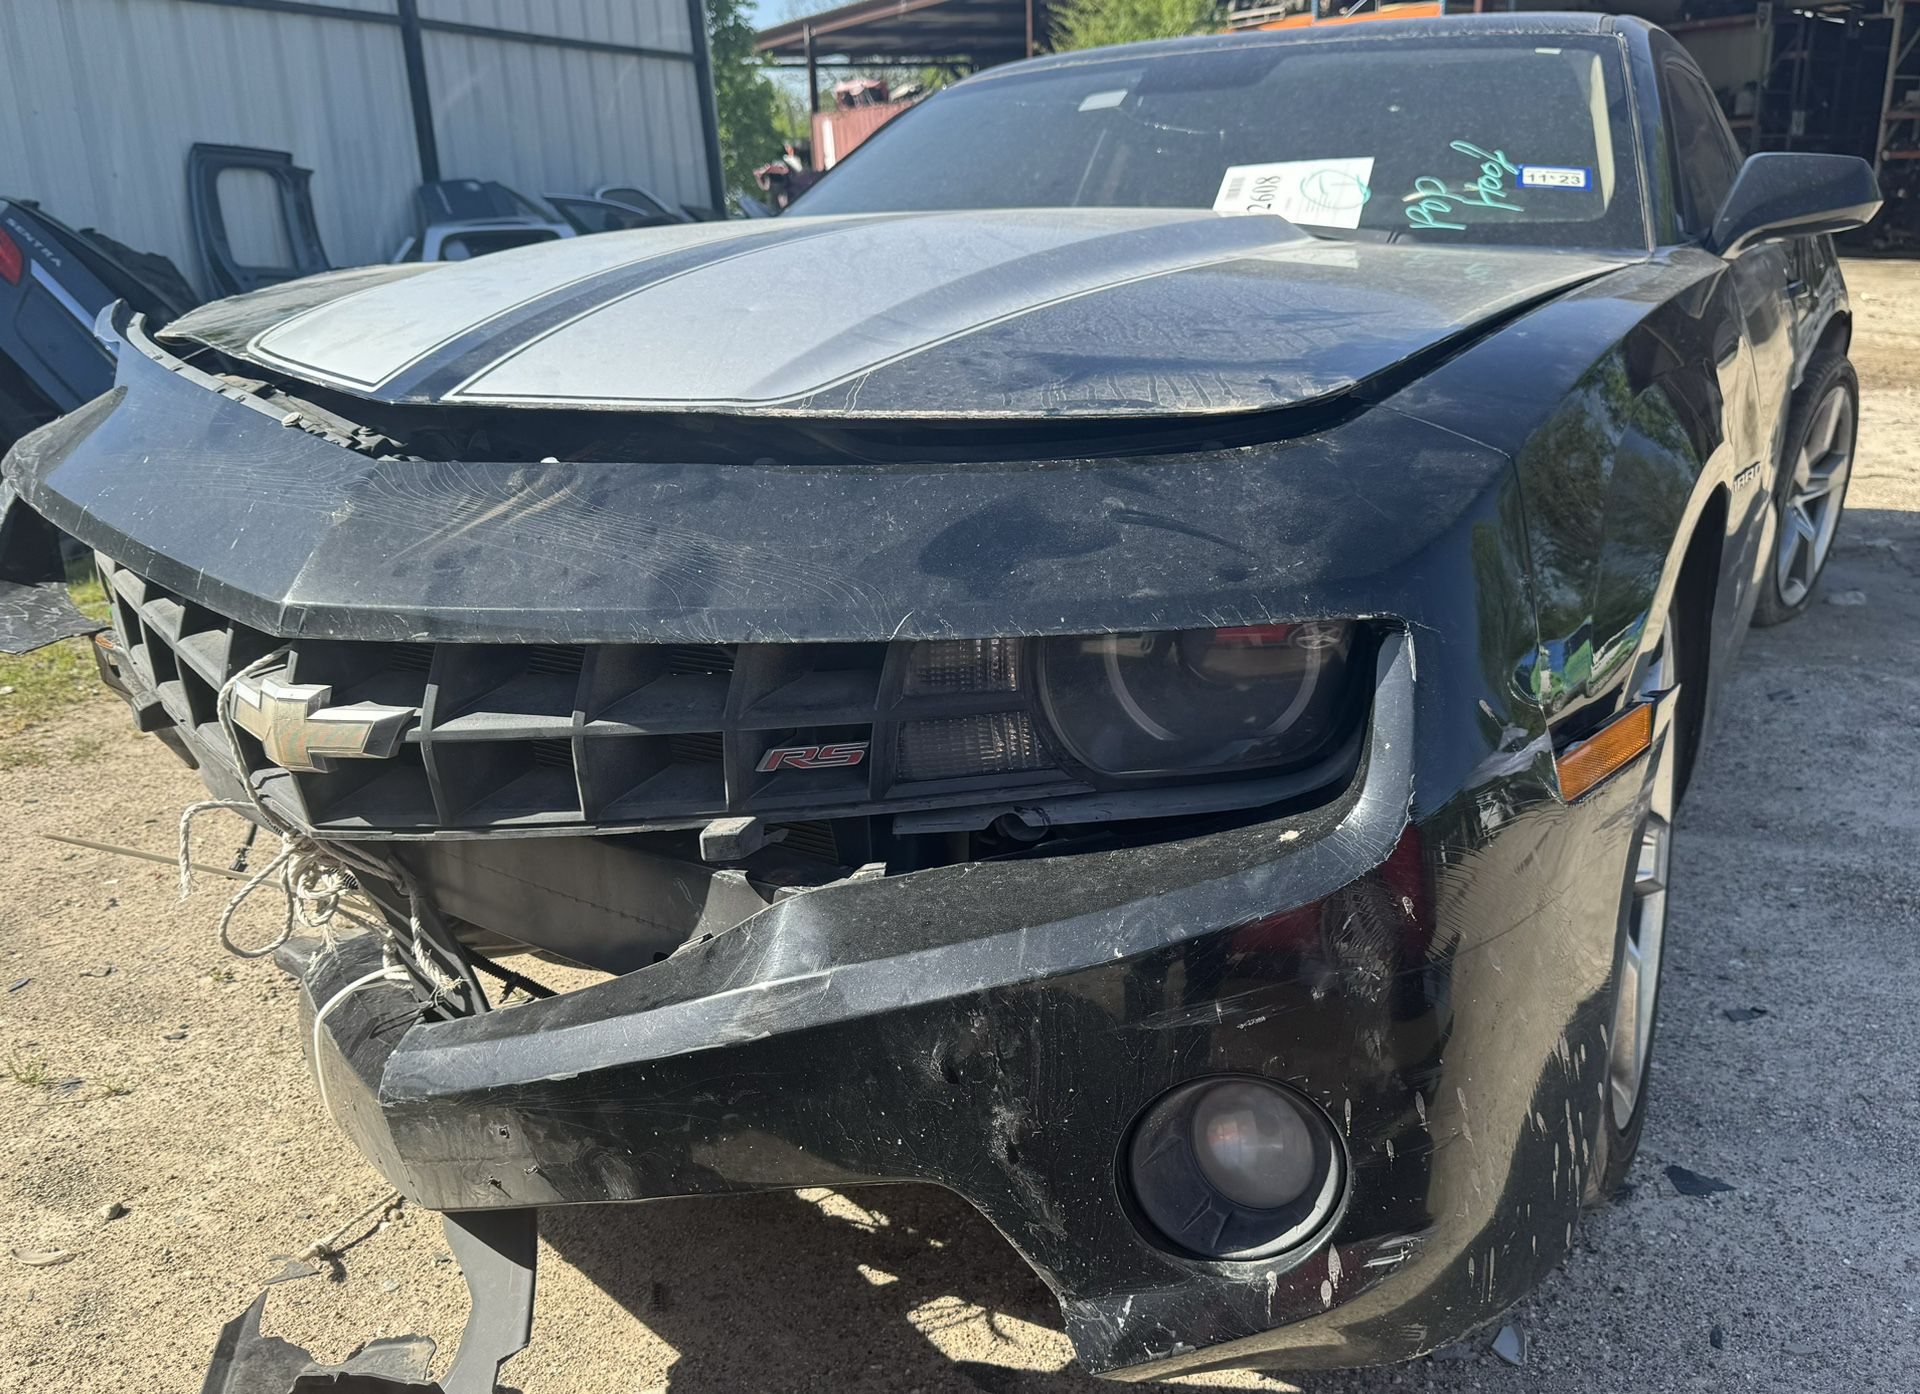 2013 Chevy Camaro 3.6L (Parts Only)